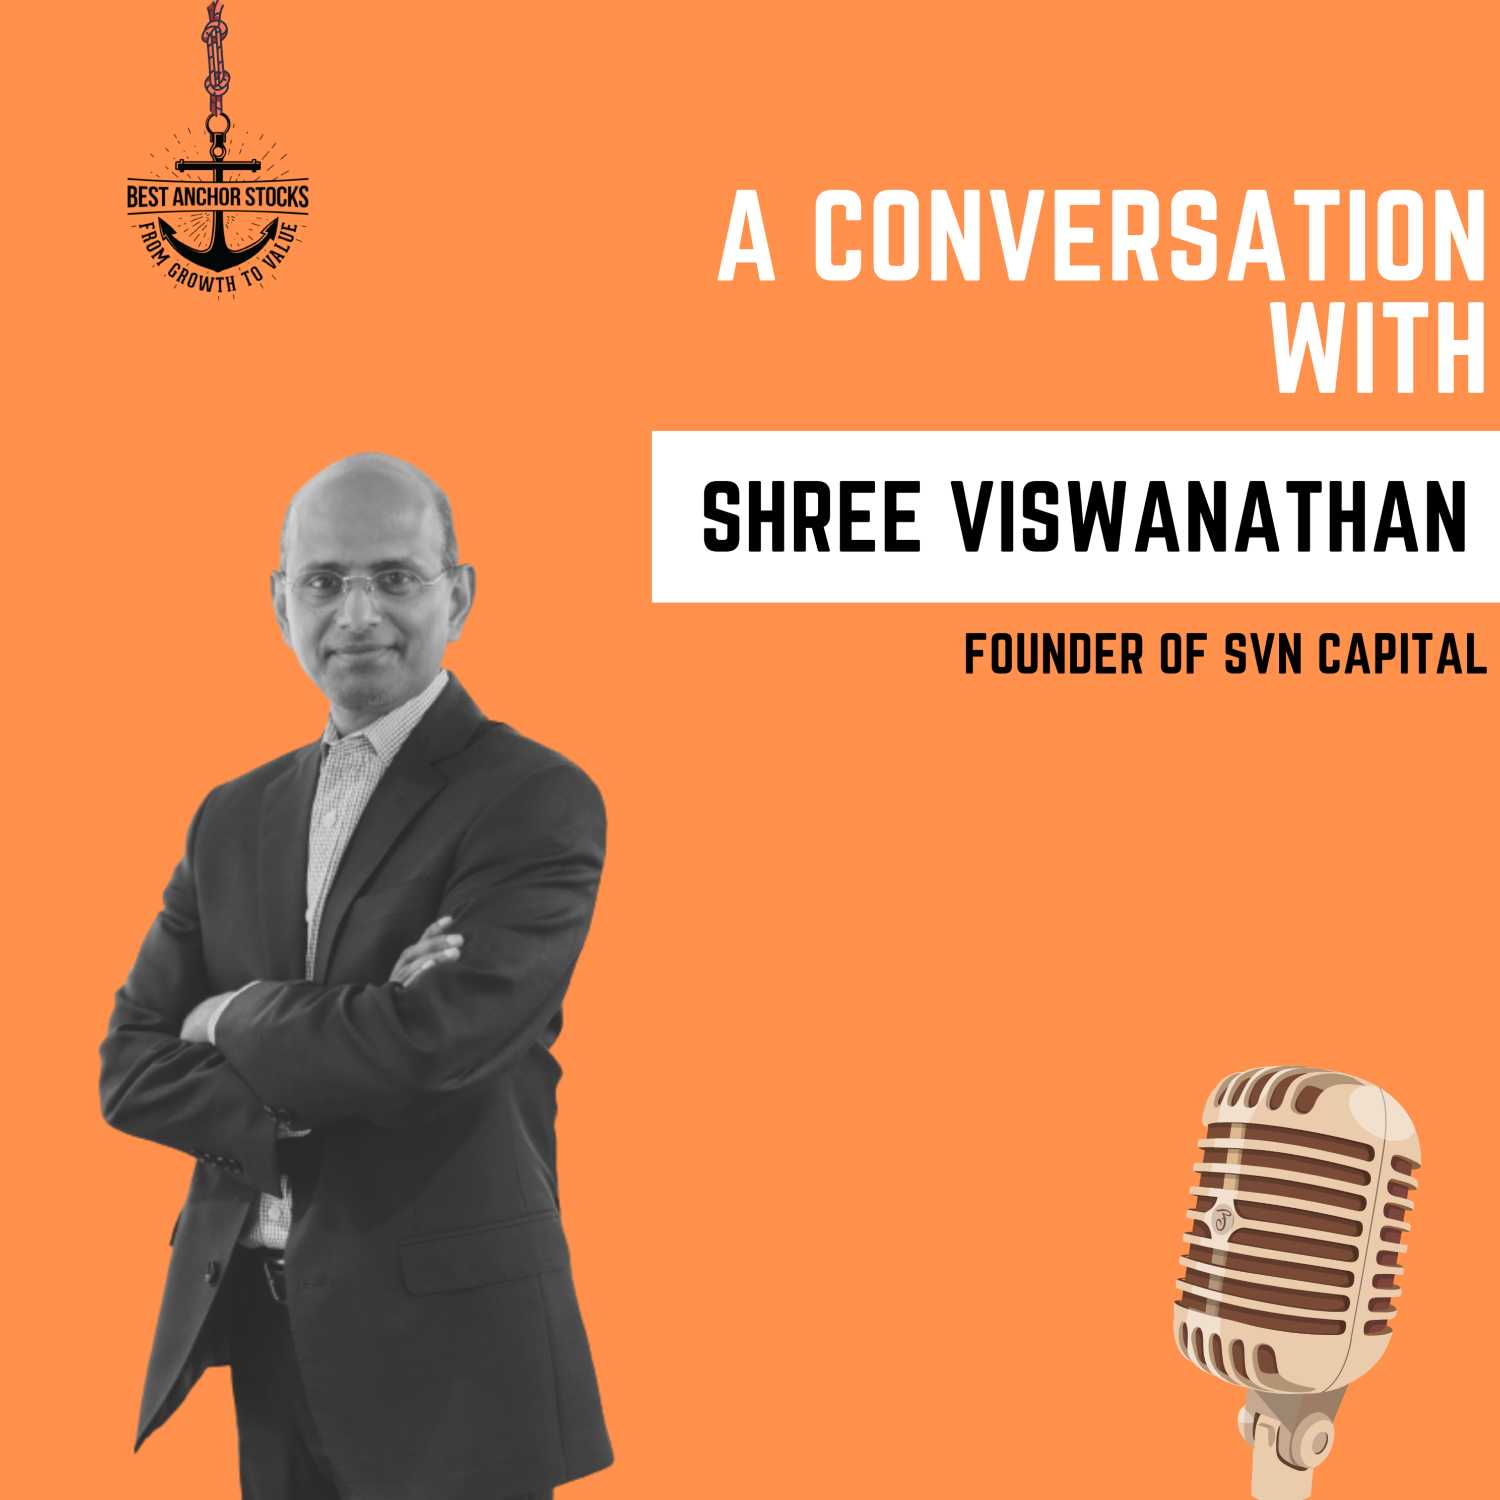 A Conversation with Shree Viswanathan, founder of SVN Capital